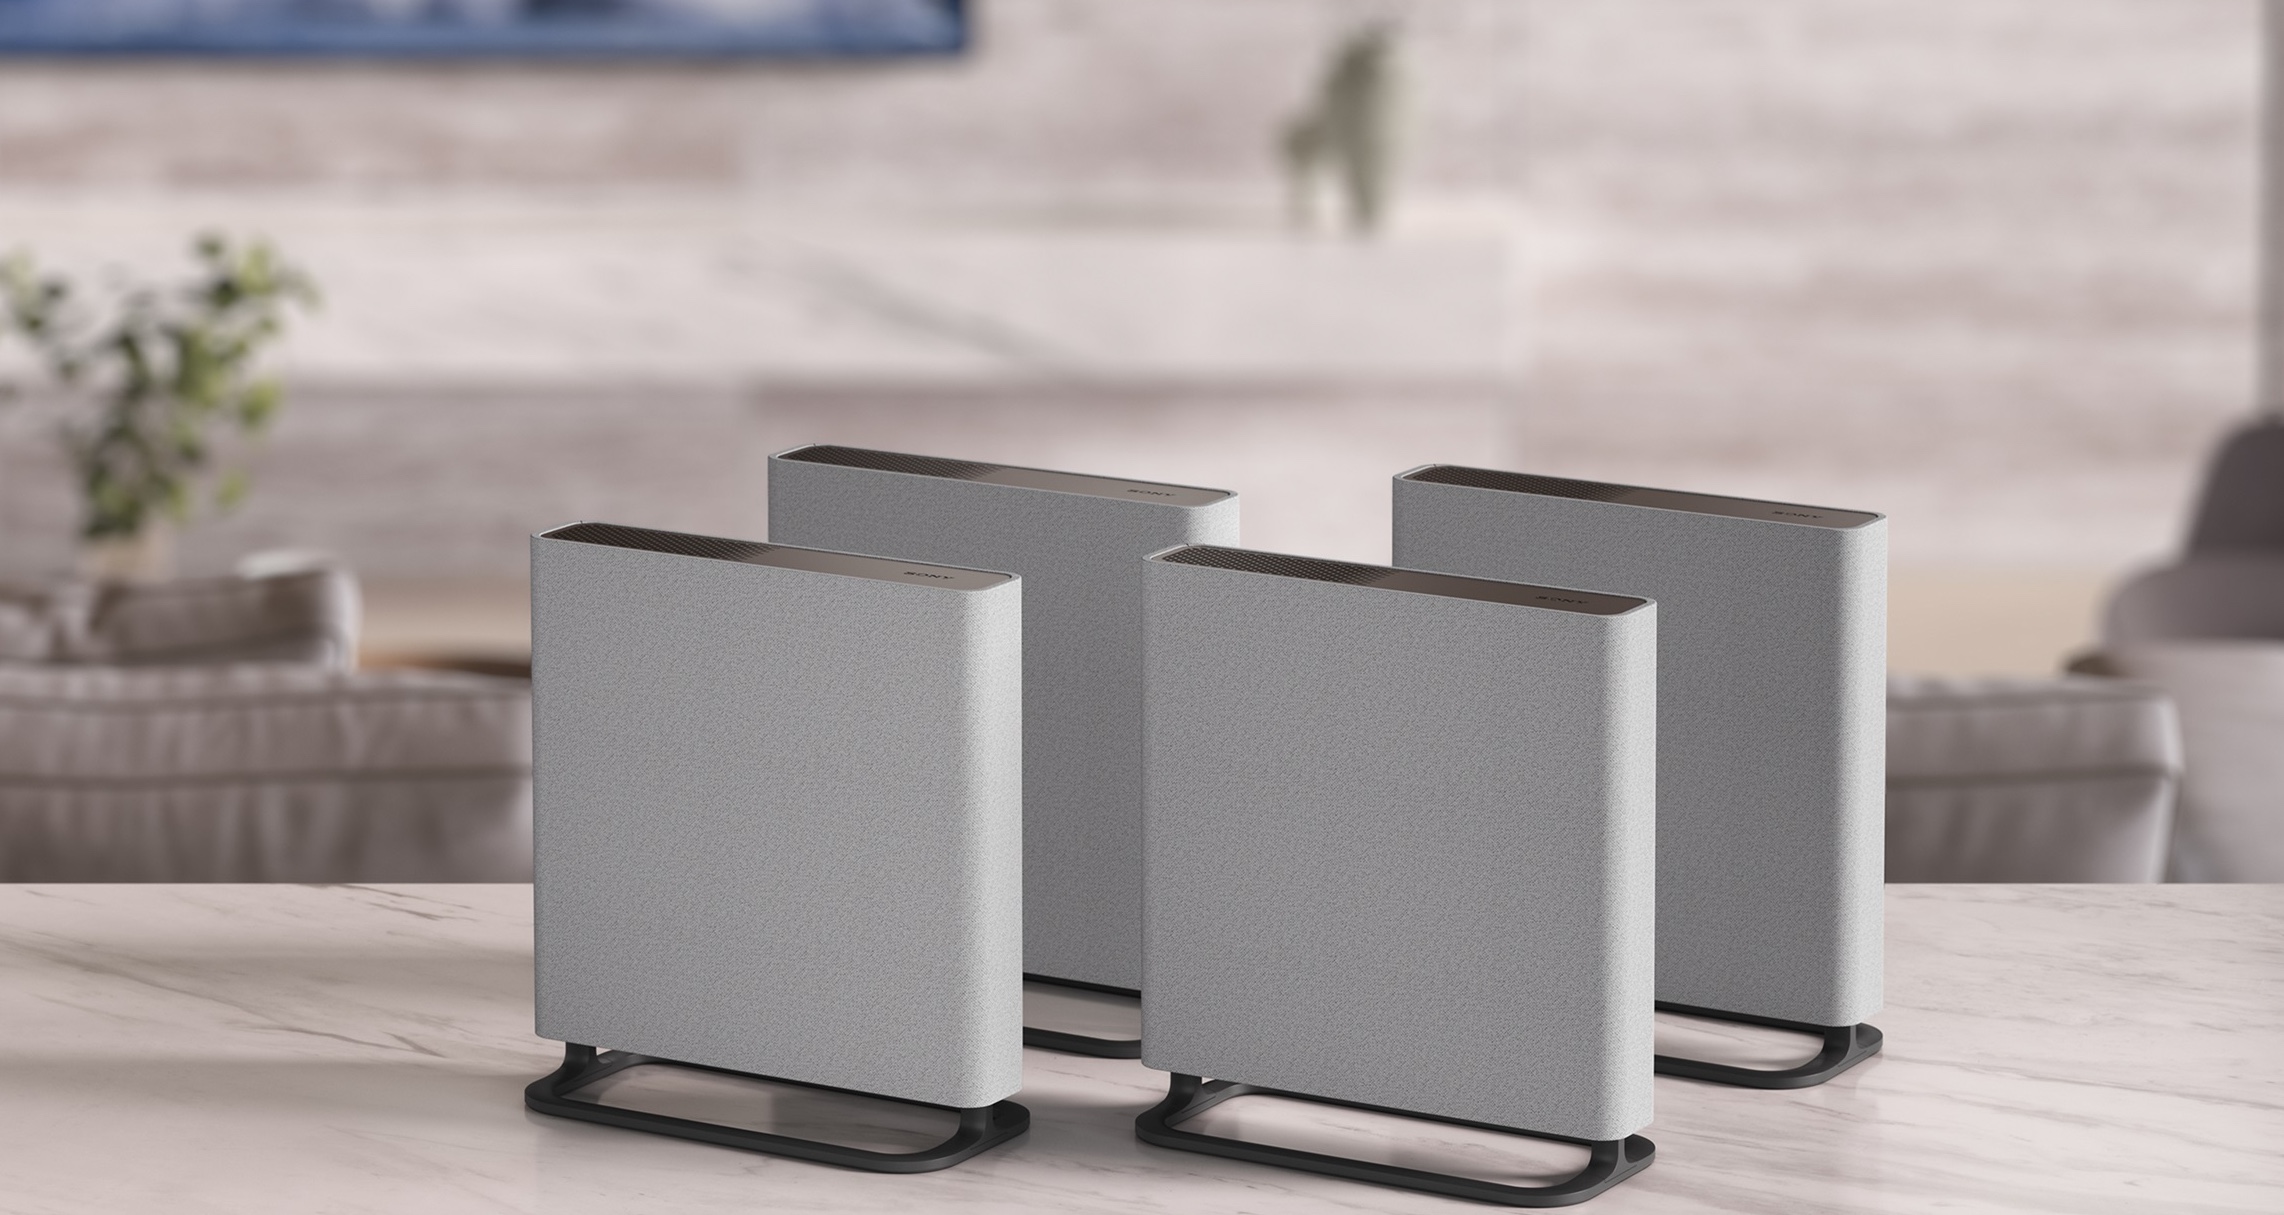 Cinema is coming home: Sony introduces brand-new range of BRAVIA Theatre home audio products